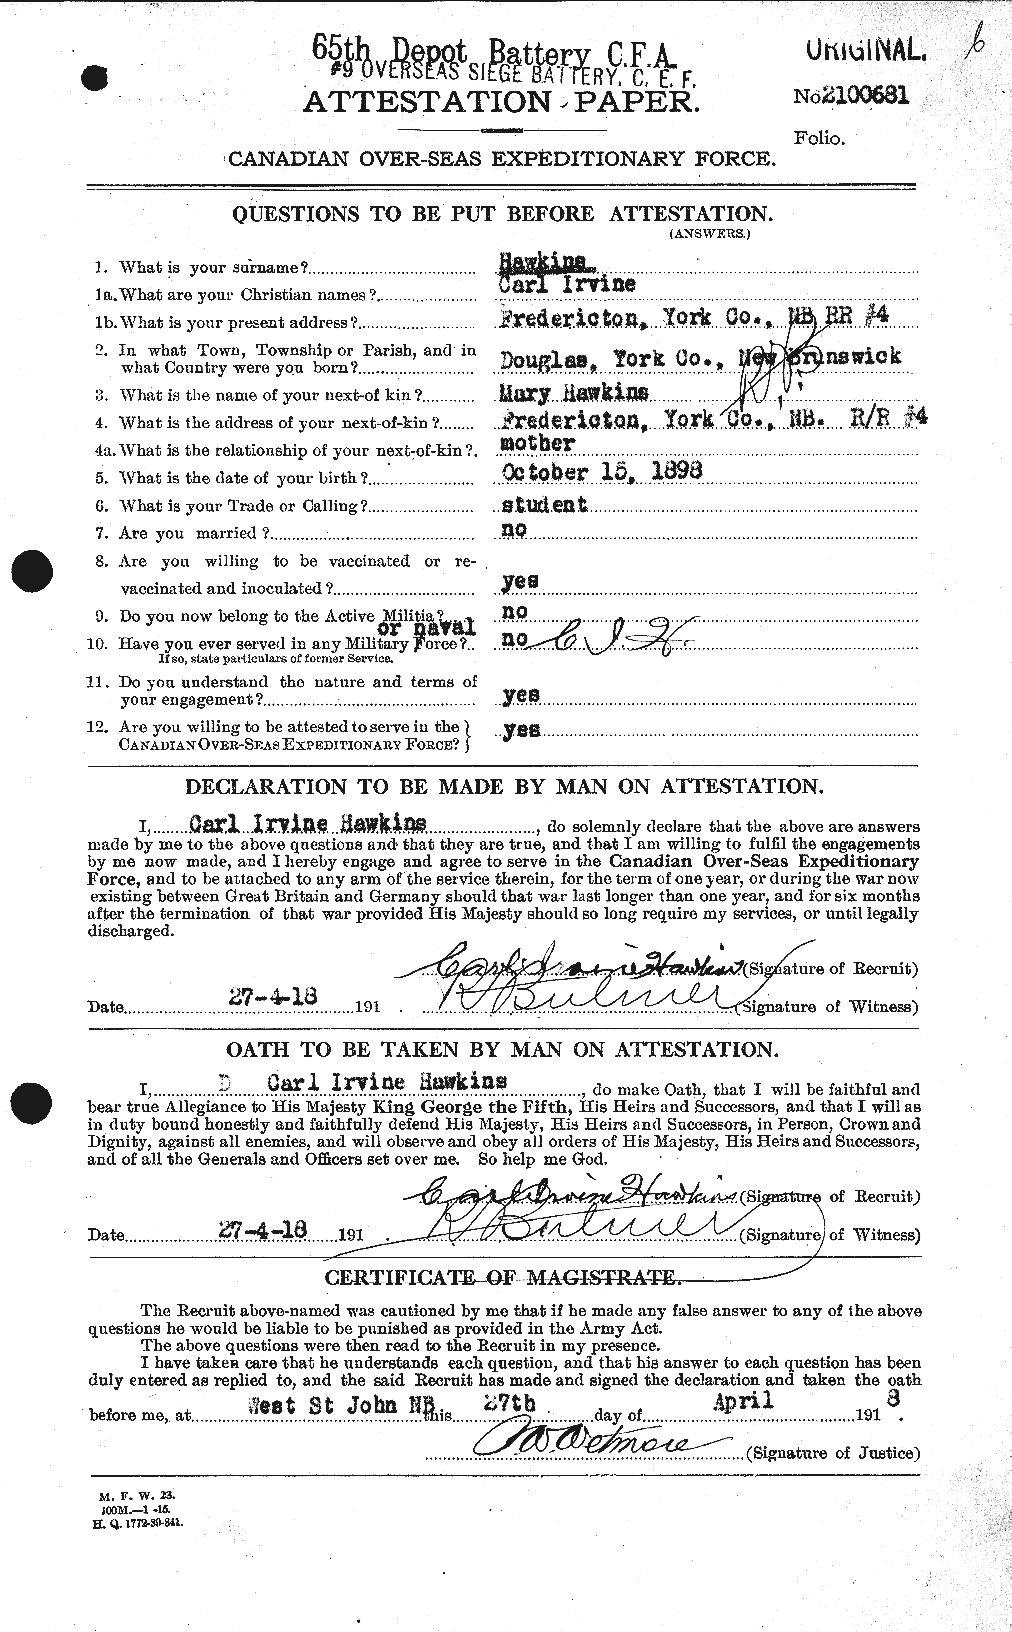 Personnel Records of the First World War - CEF 384640a